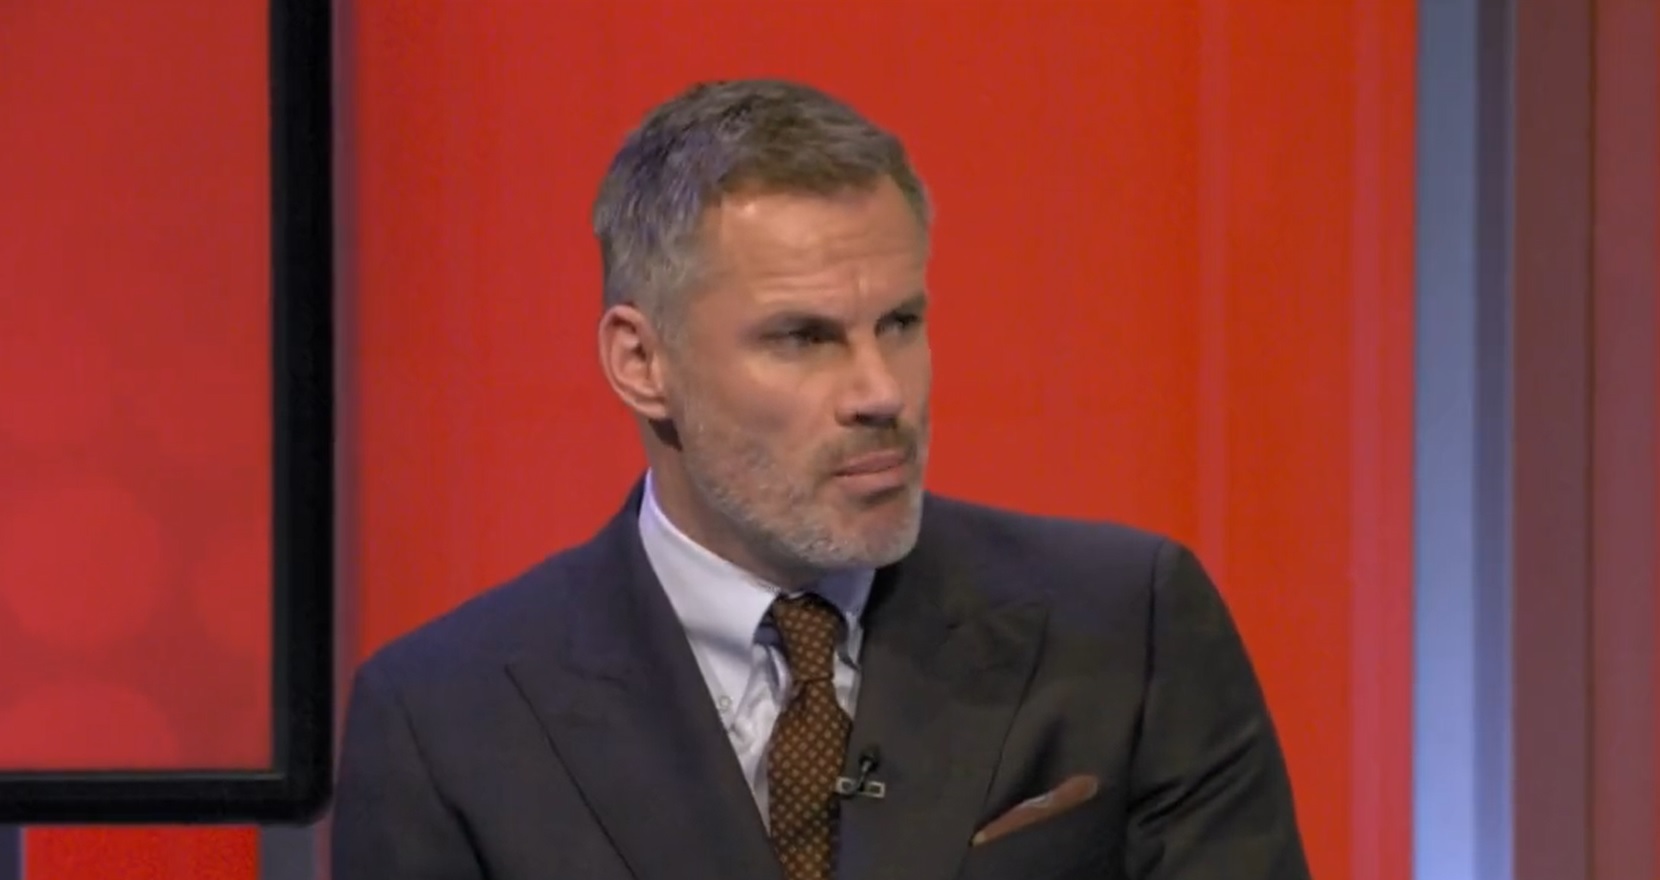 Jamie Carragher reacts as Liverpool drop points to Tottenham to add latest twist to title race